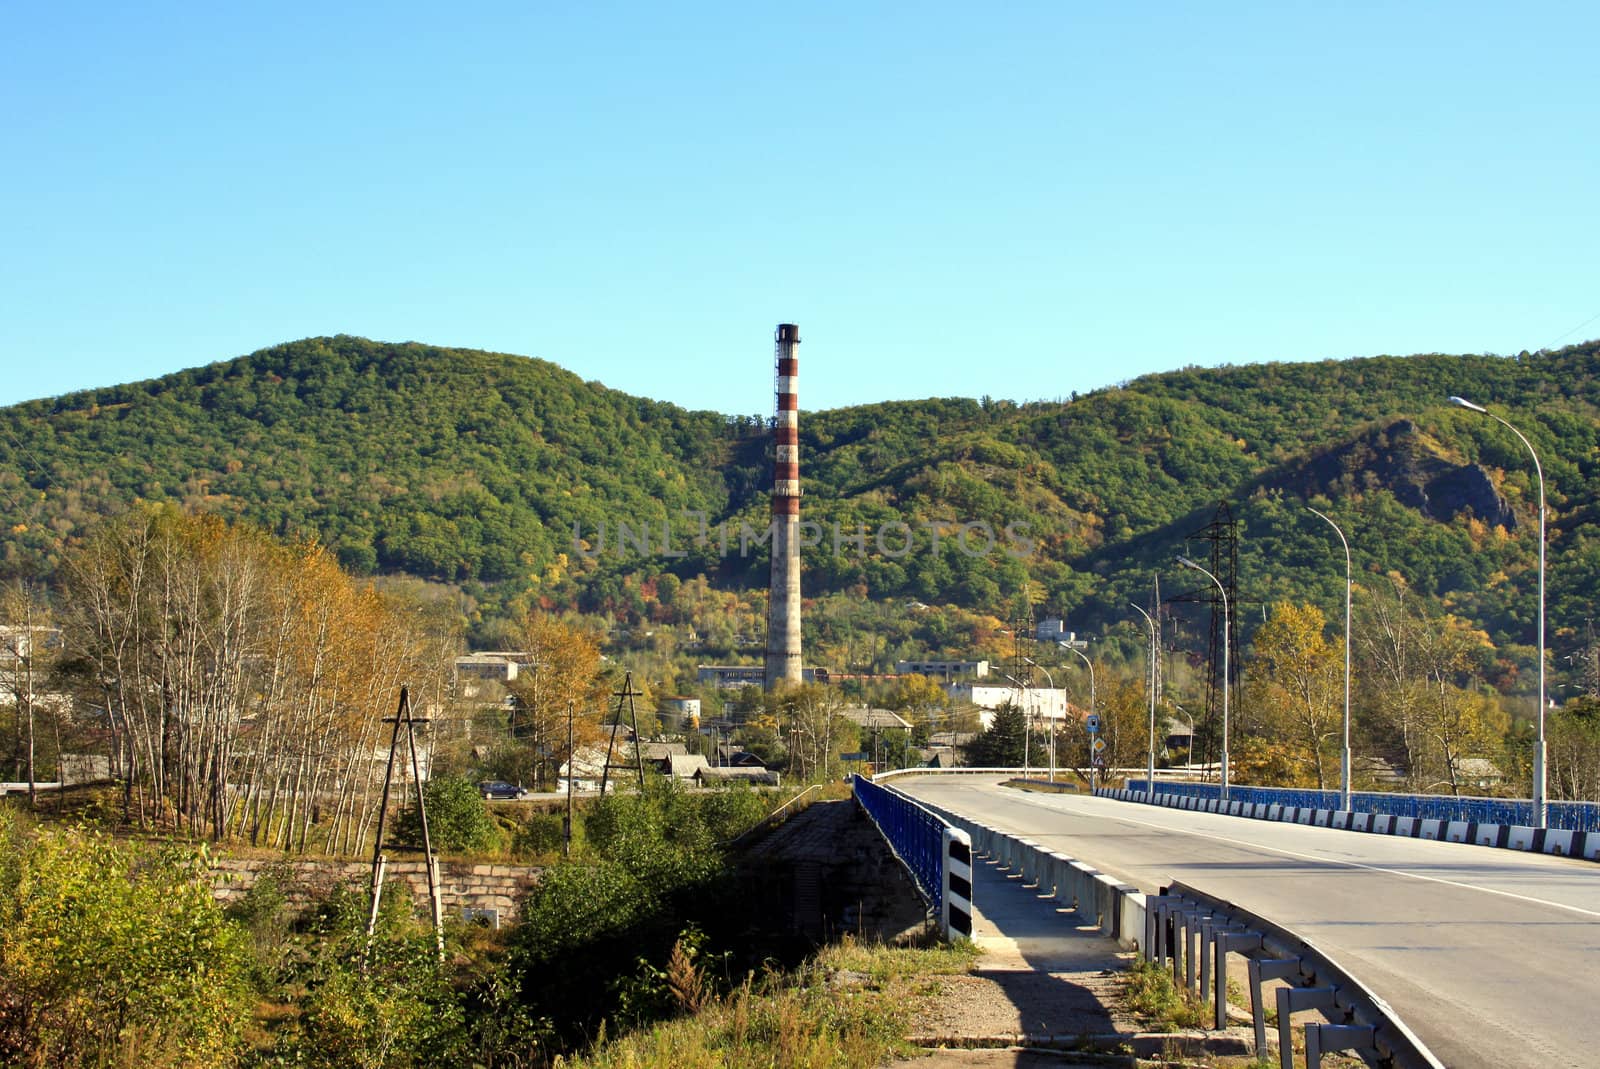 Autumn landscape of a city in mountain area